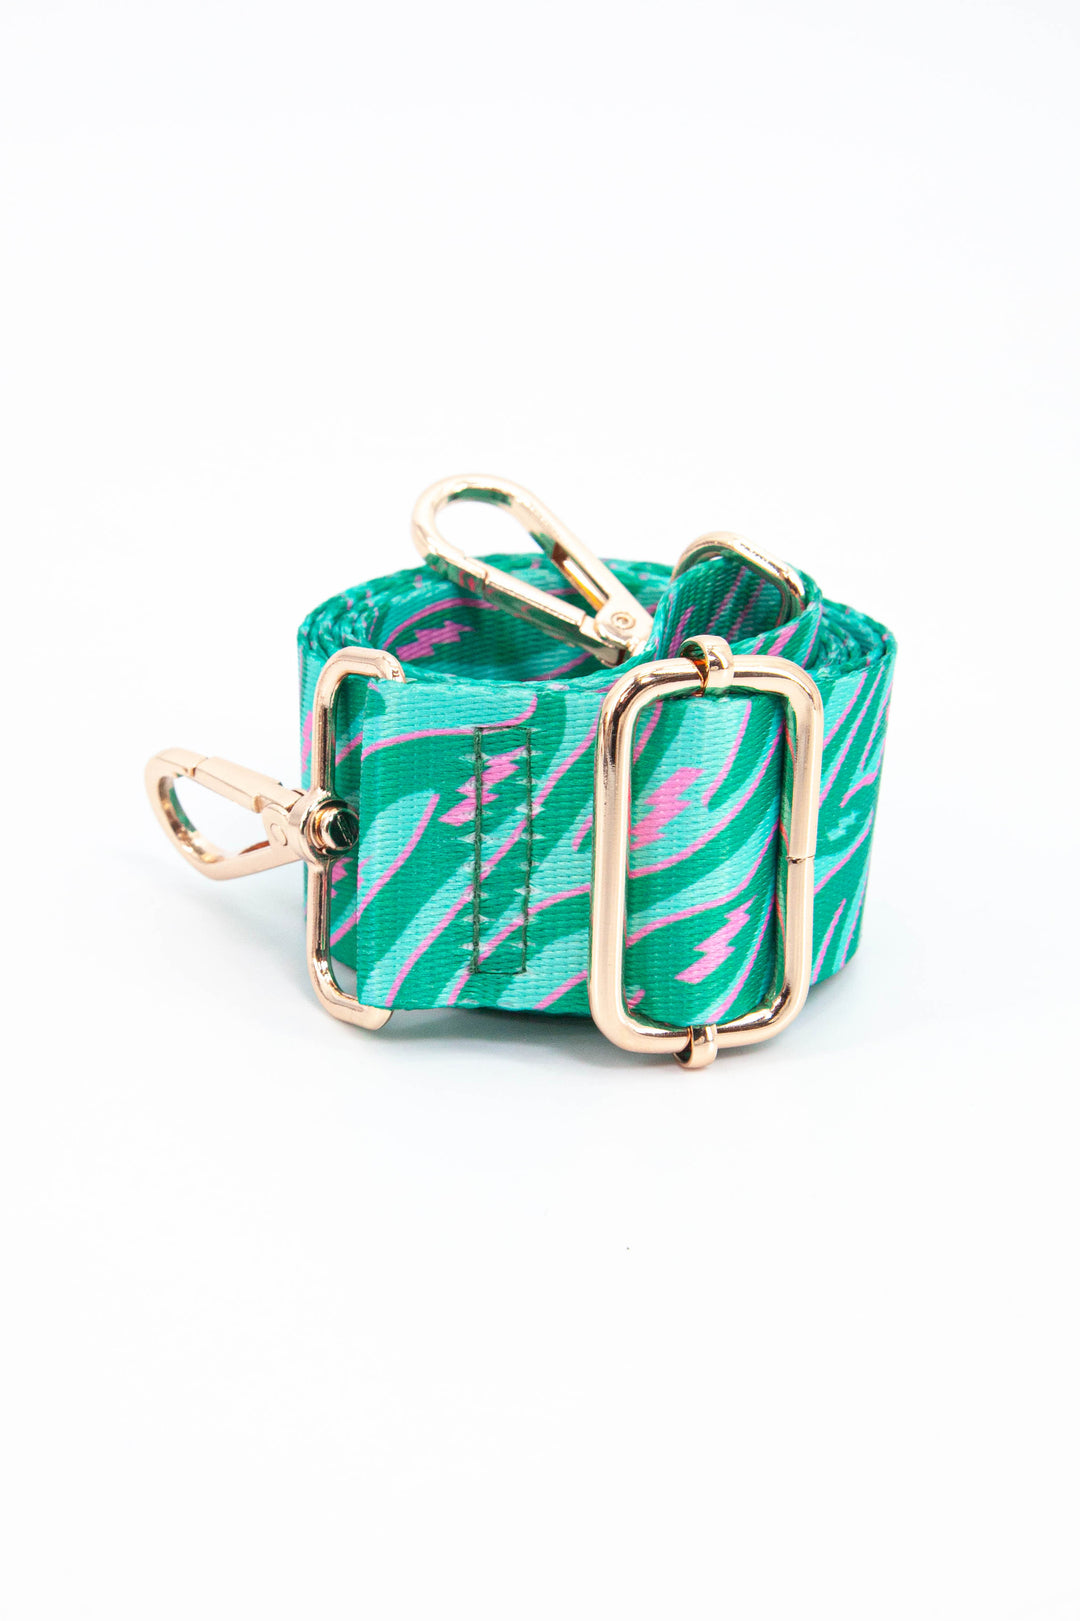 close up of the green and pink zebra and lightning bolt pattern bag strap